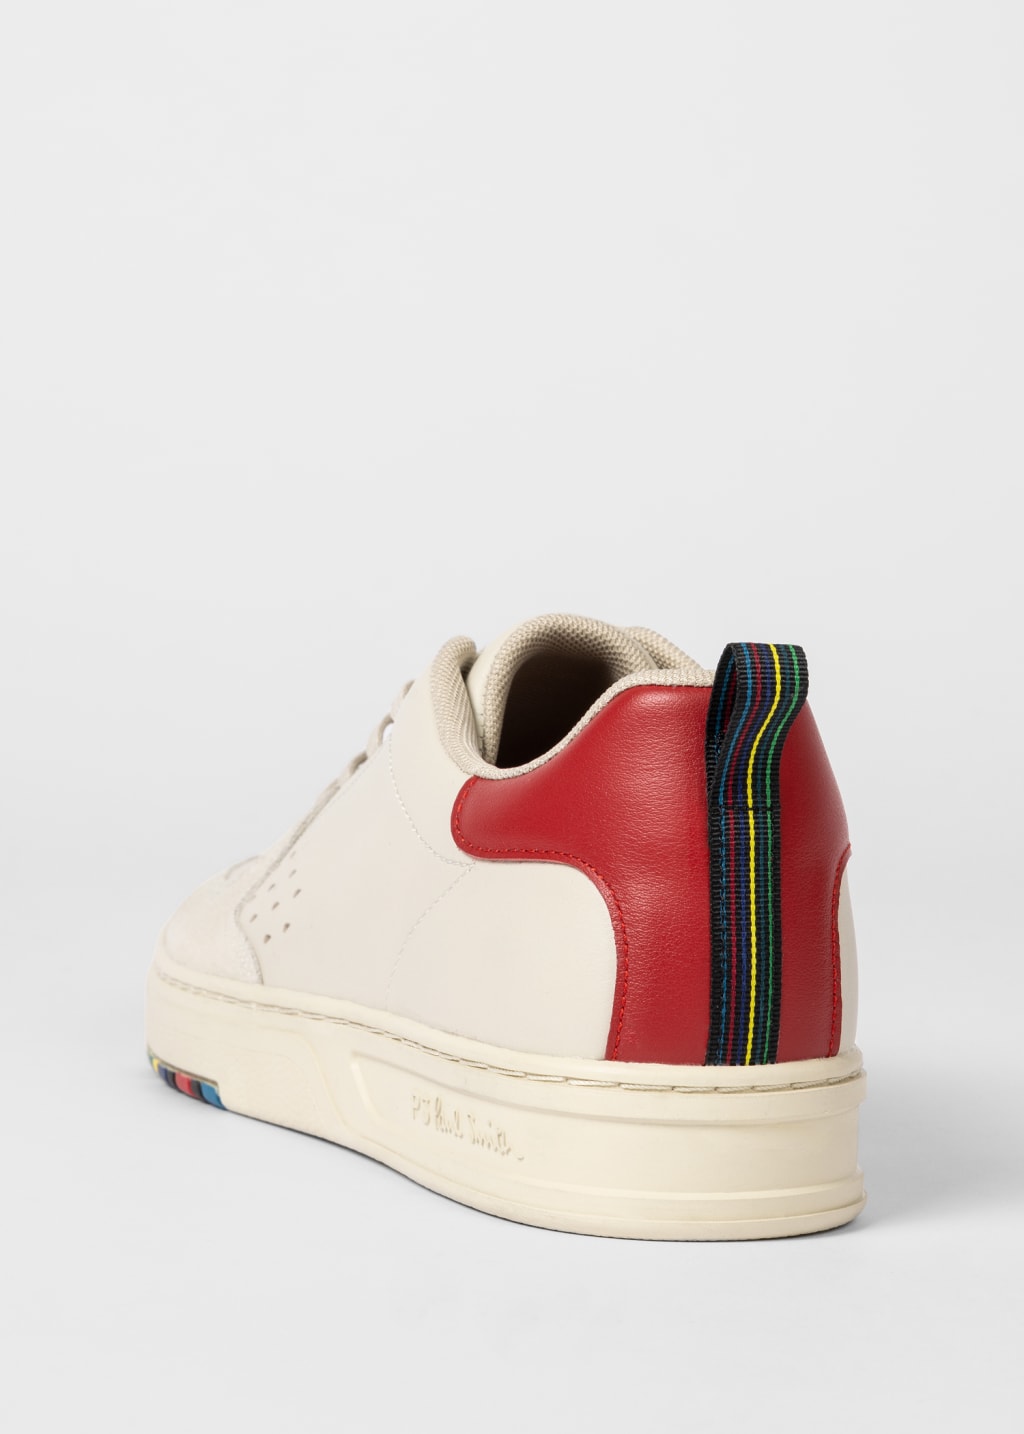 Detail View - Cream Leather 'Cosmo' Trainers With Red Trim Paul Smith